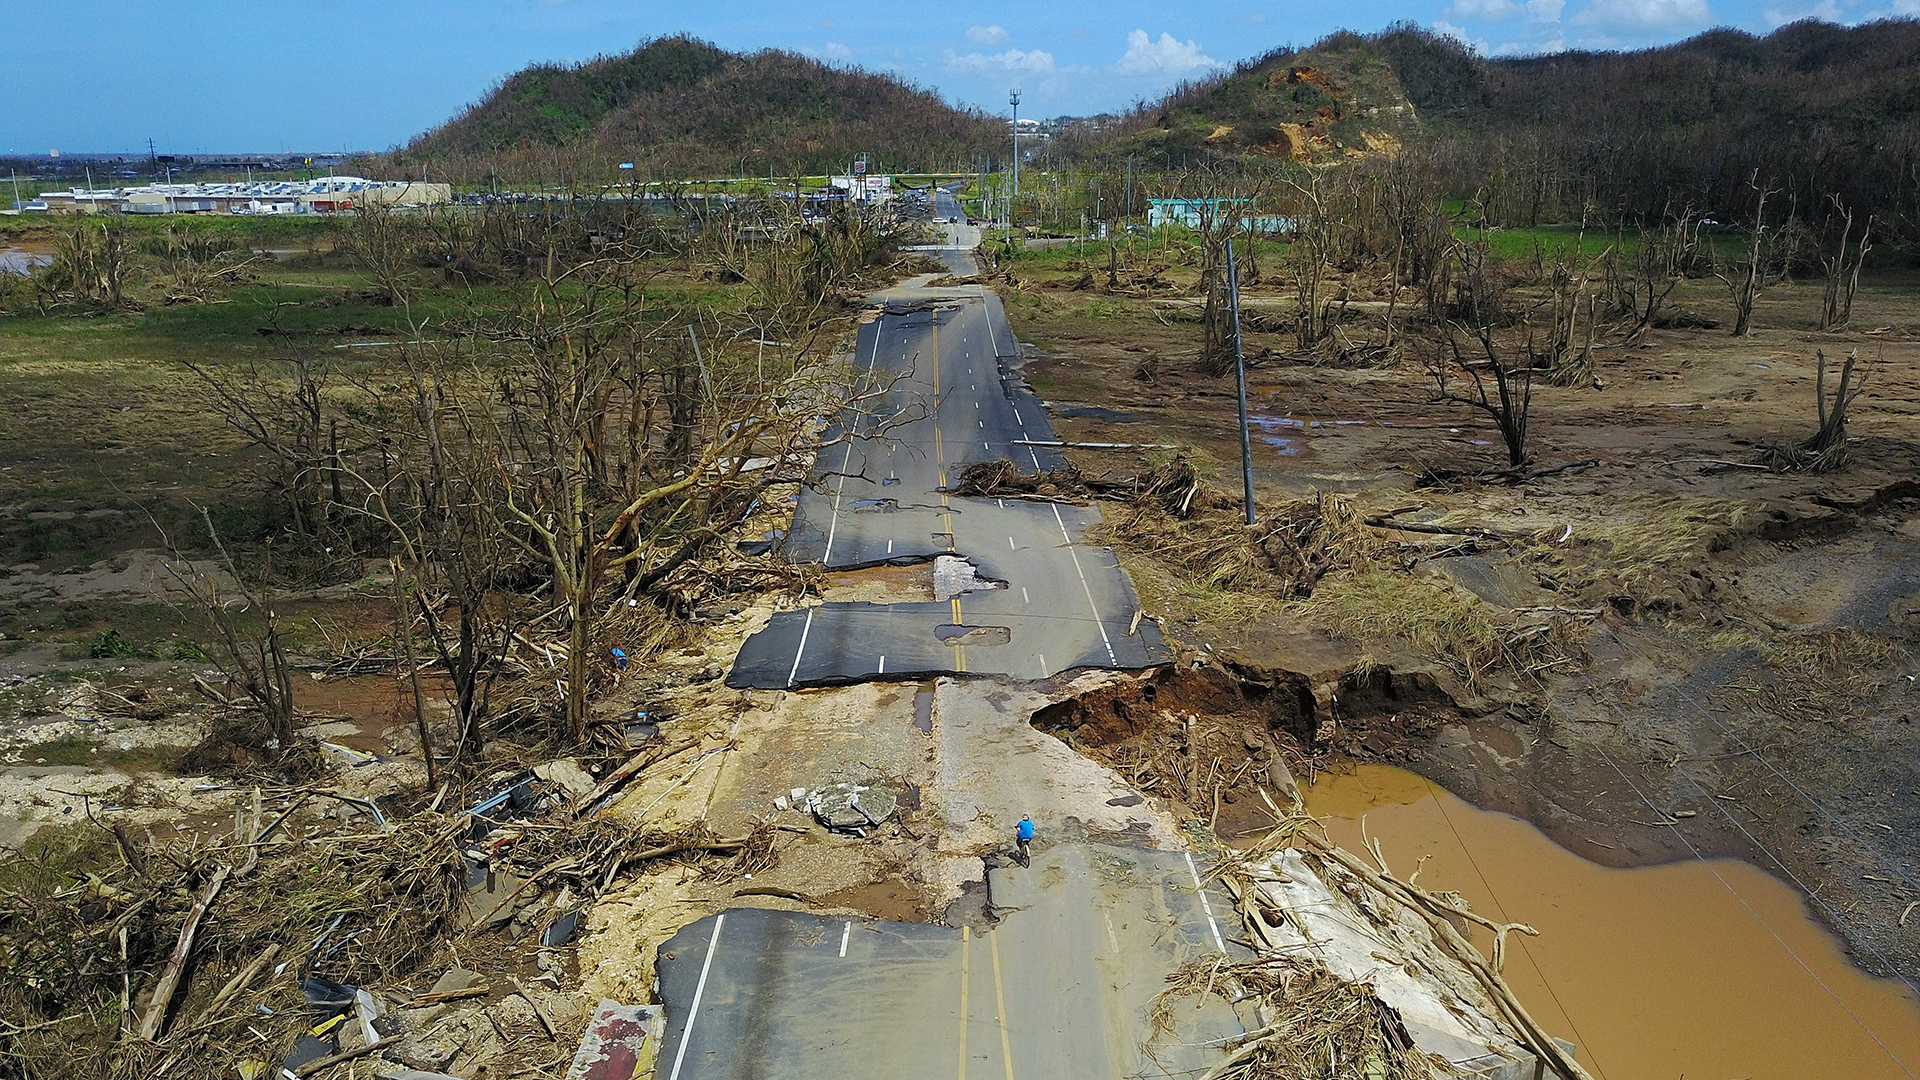 A man rides a bicycle along a damaged road in Toa Alta, west of San Juan, Puerto Rico, on September 24, 2017, after Hurricane Maria.